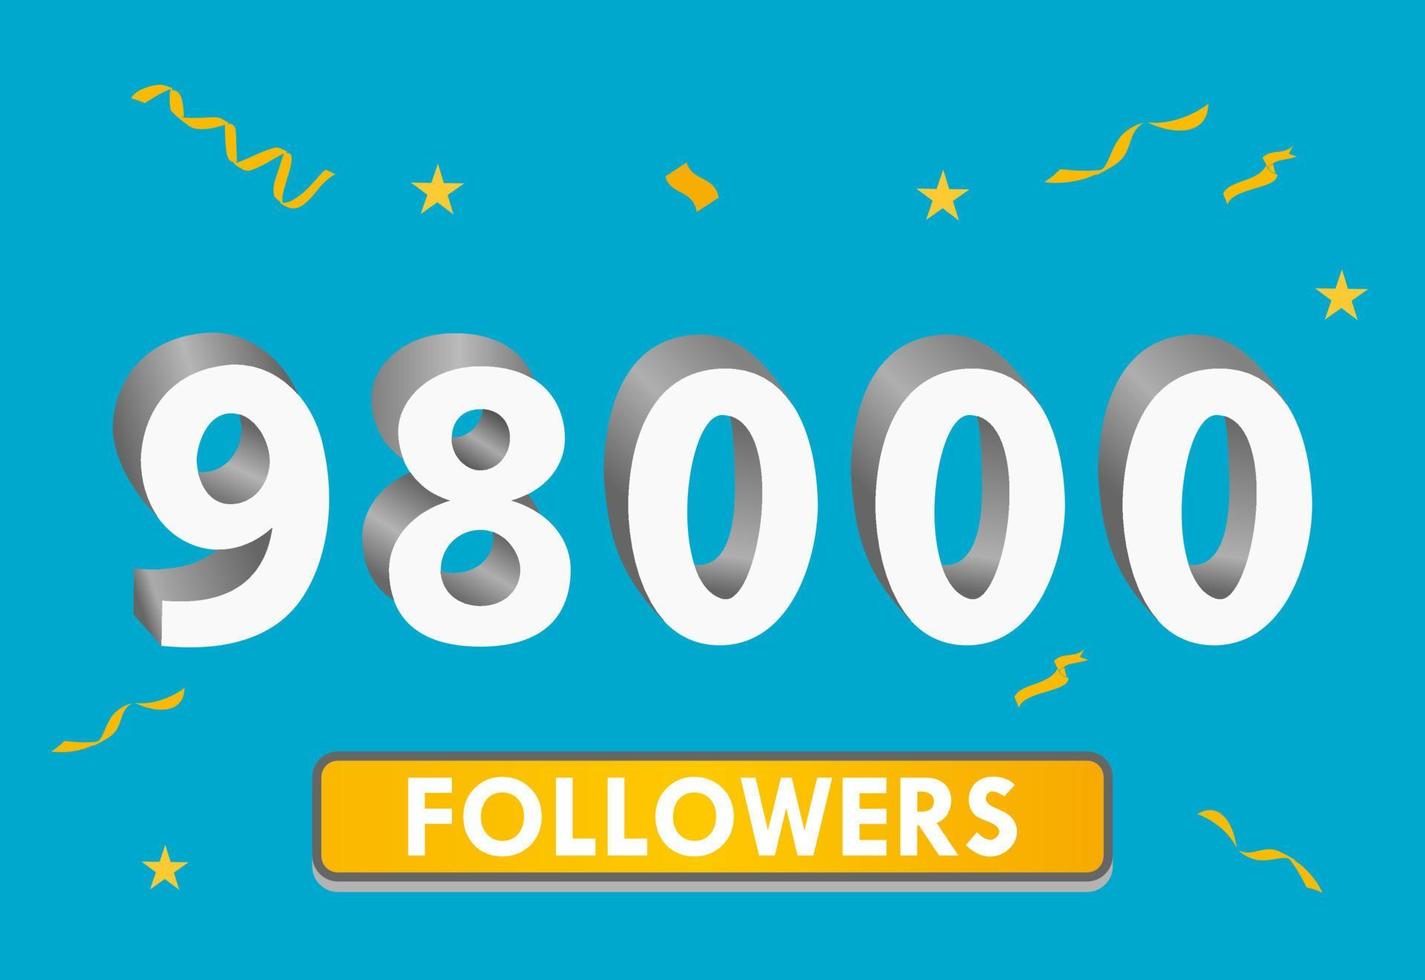 Illustration 3d numbers for social media 98k likes thanks, celebrating subscribers fans. Banner with 98000 followers vector